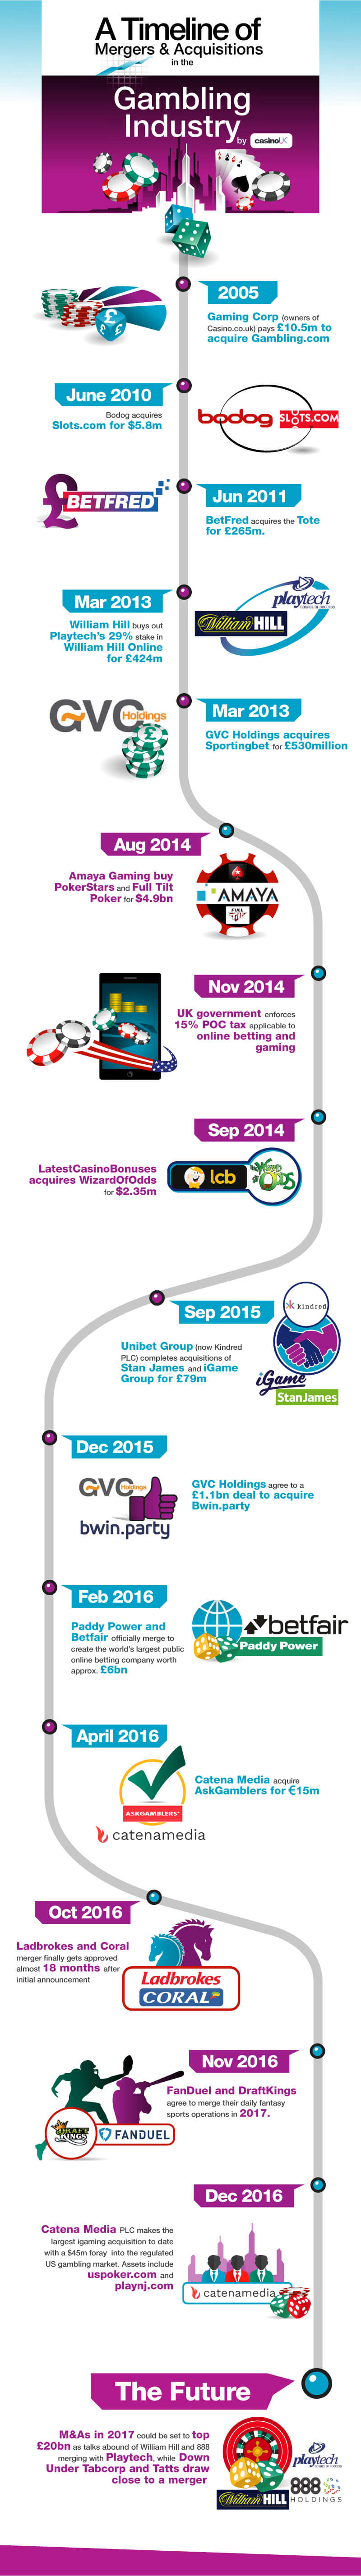 An infographic depicting a timeline of mergers and acquisitions within the casino industsry